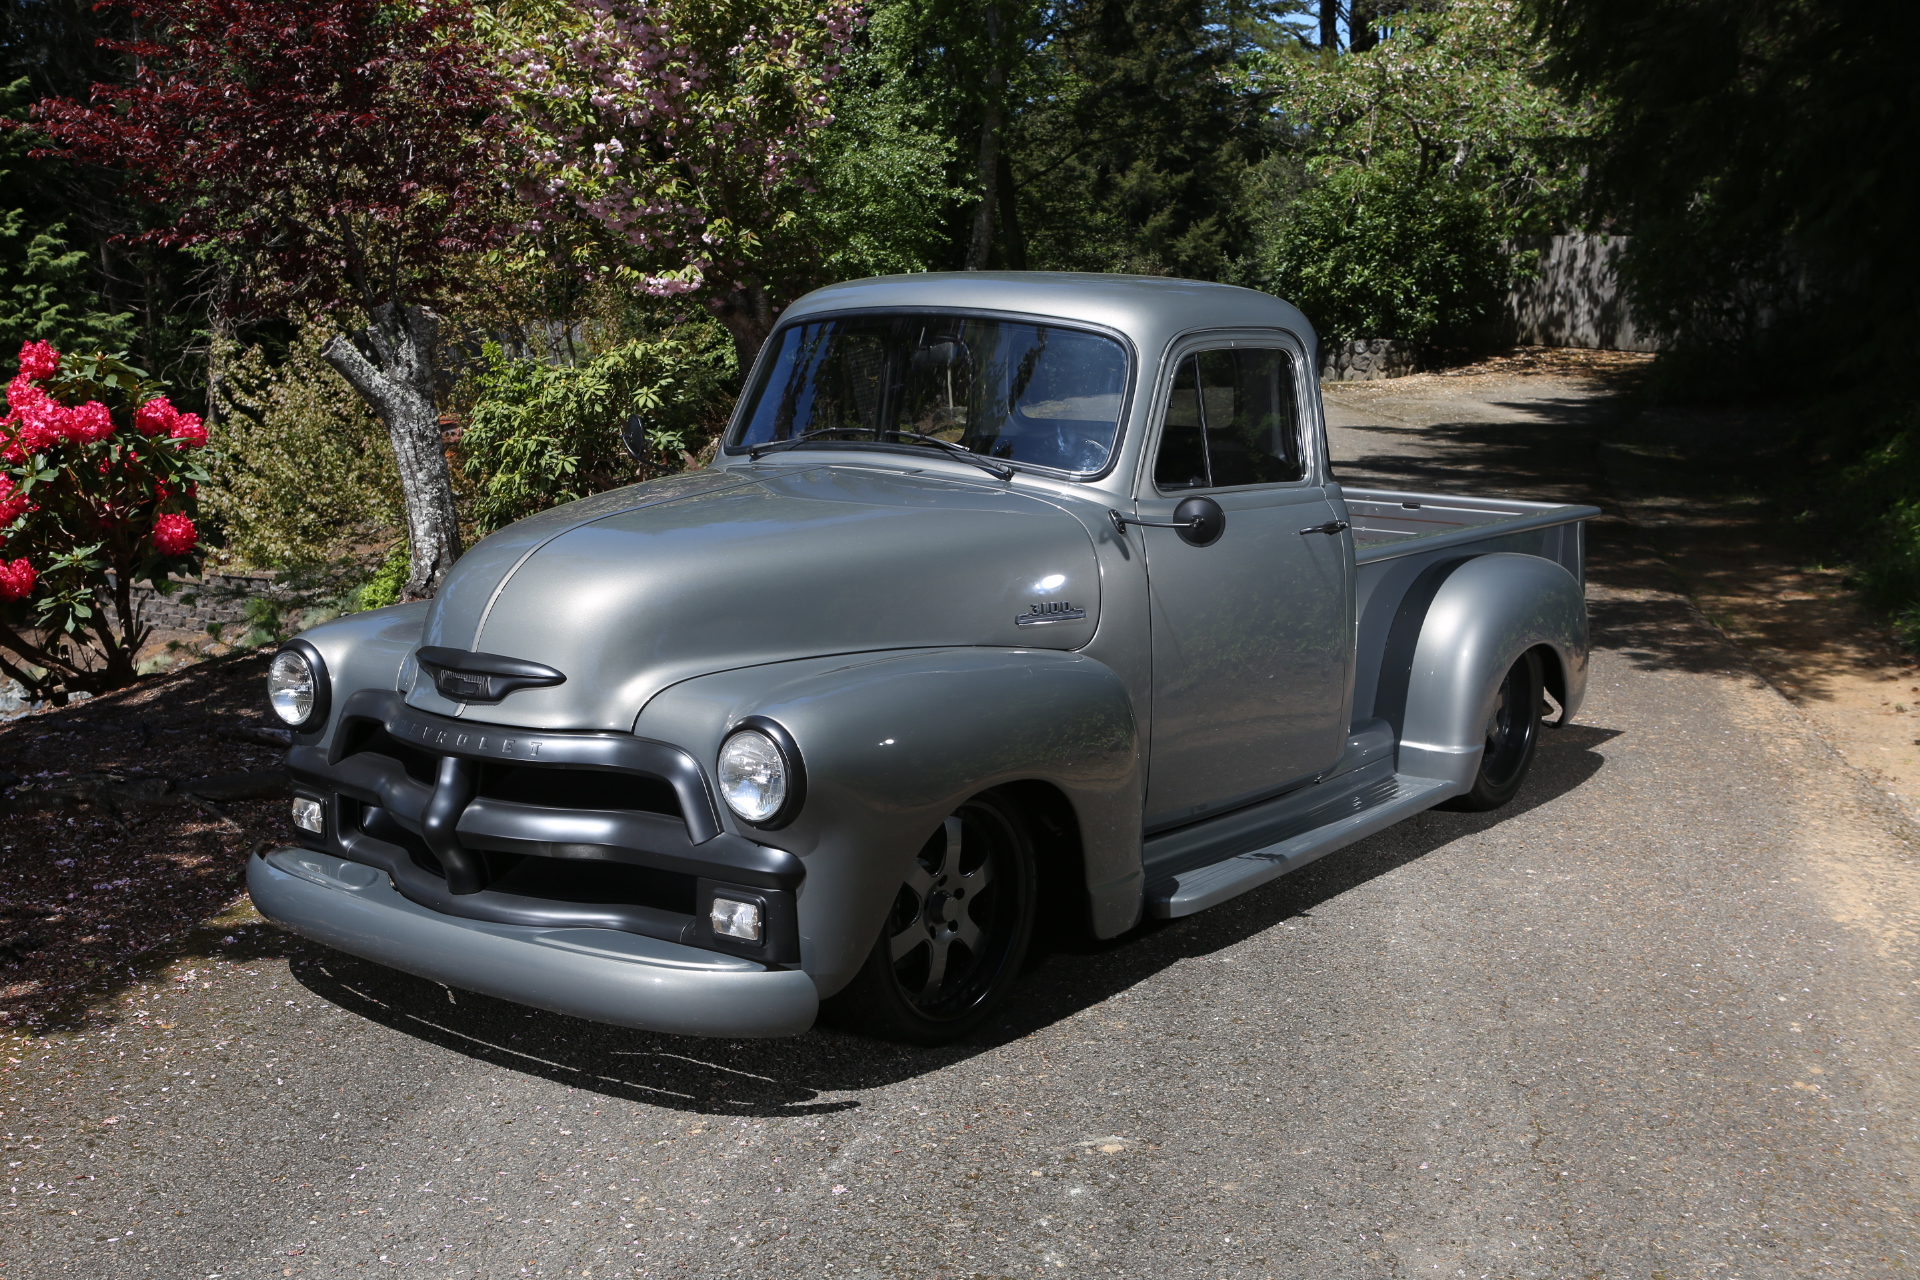 1954 Chevy truck sells for $330,000 at Barrett Jackson auction.